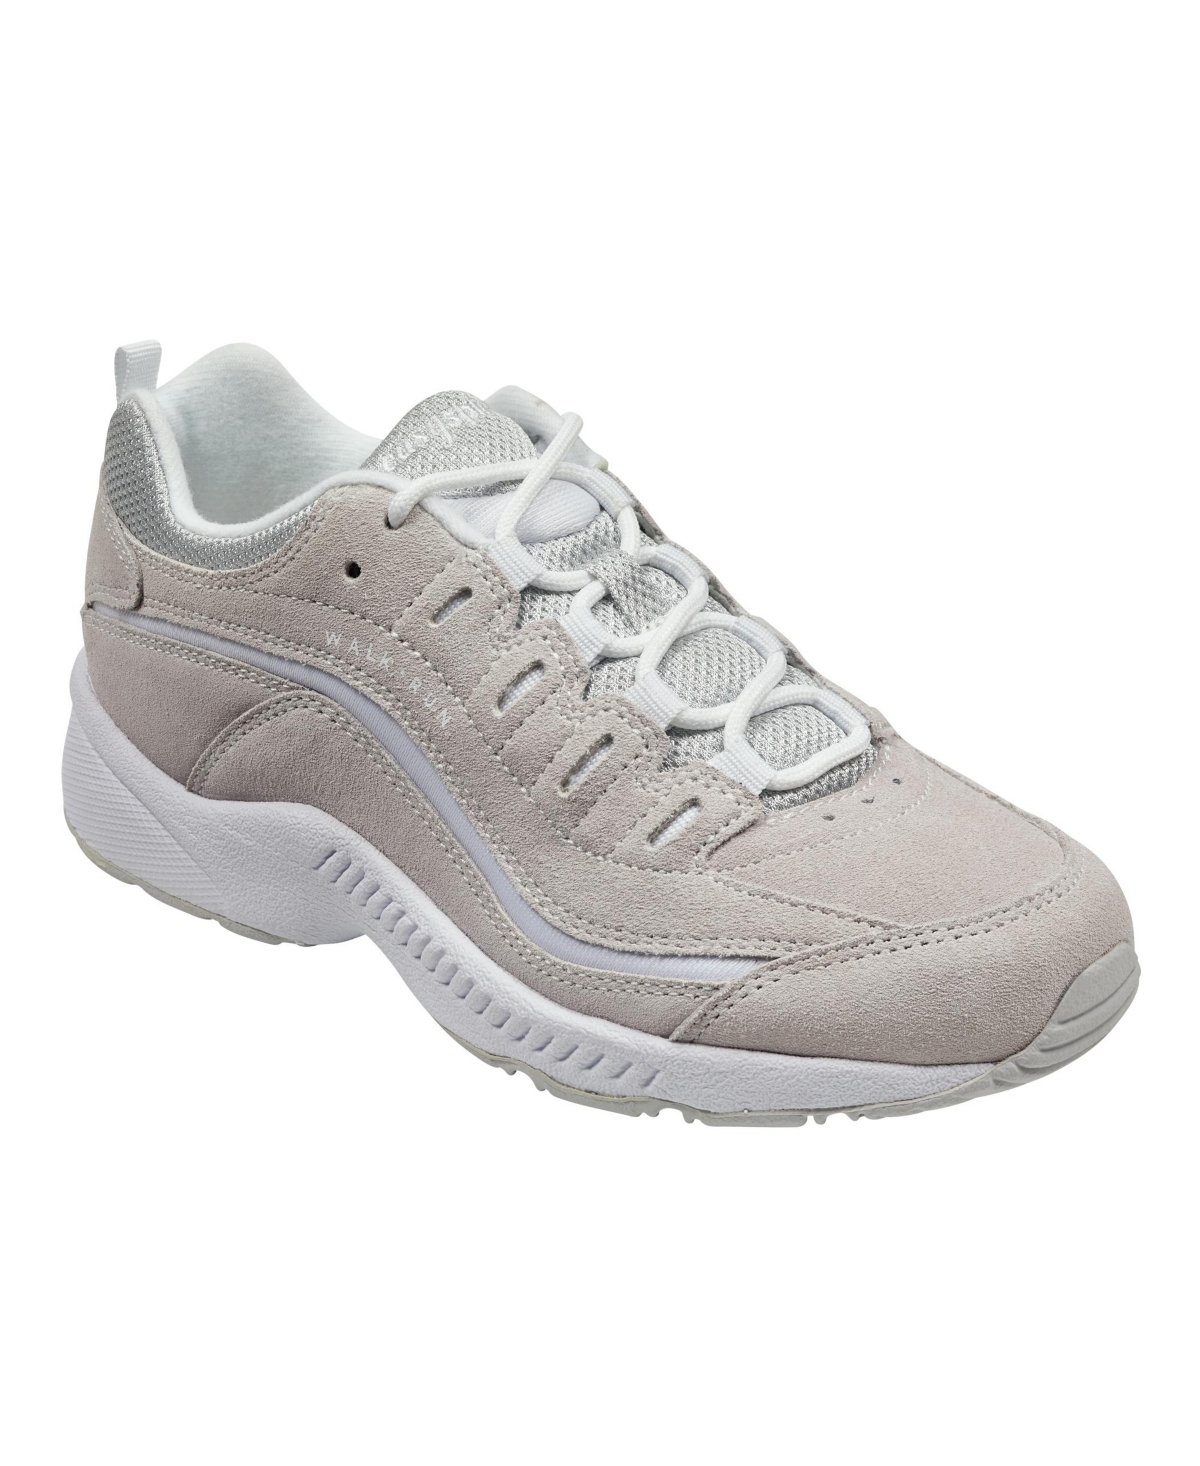 UPC 191656311821 product image for Easy Spirit Women's Romy Round Toe Casual Lace Up Walking Shoes Women's Shoes | upcitemdb.com